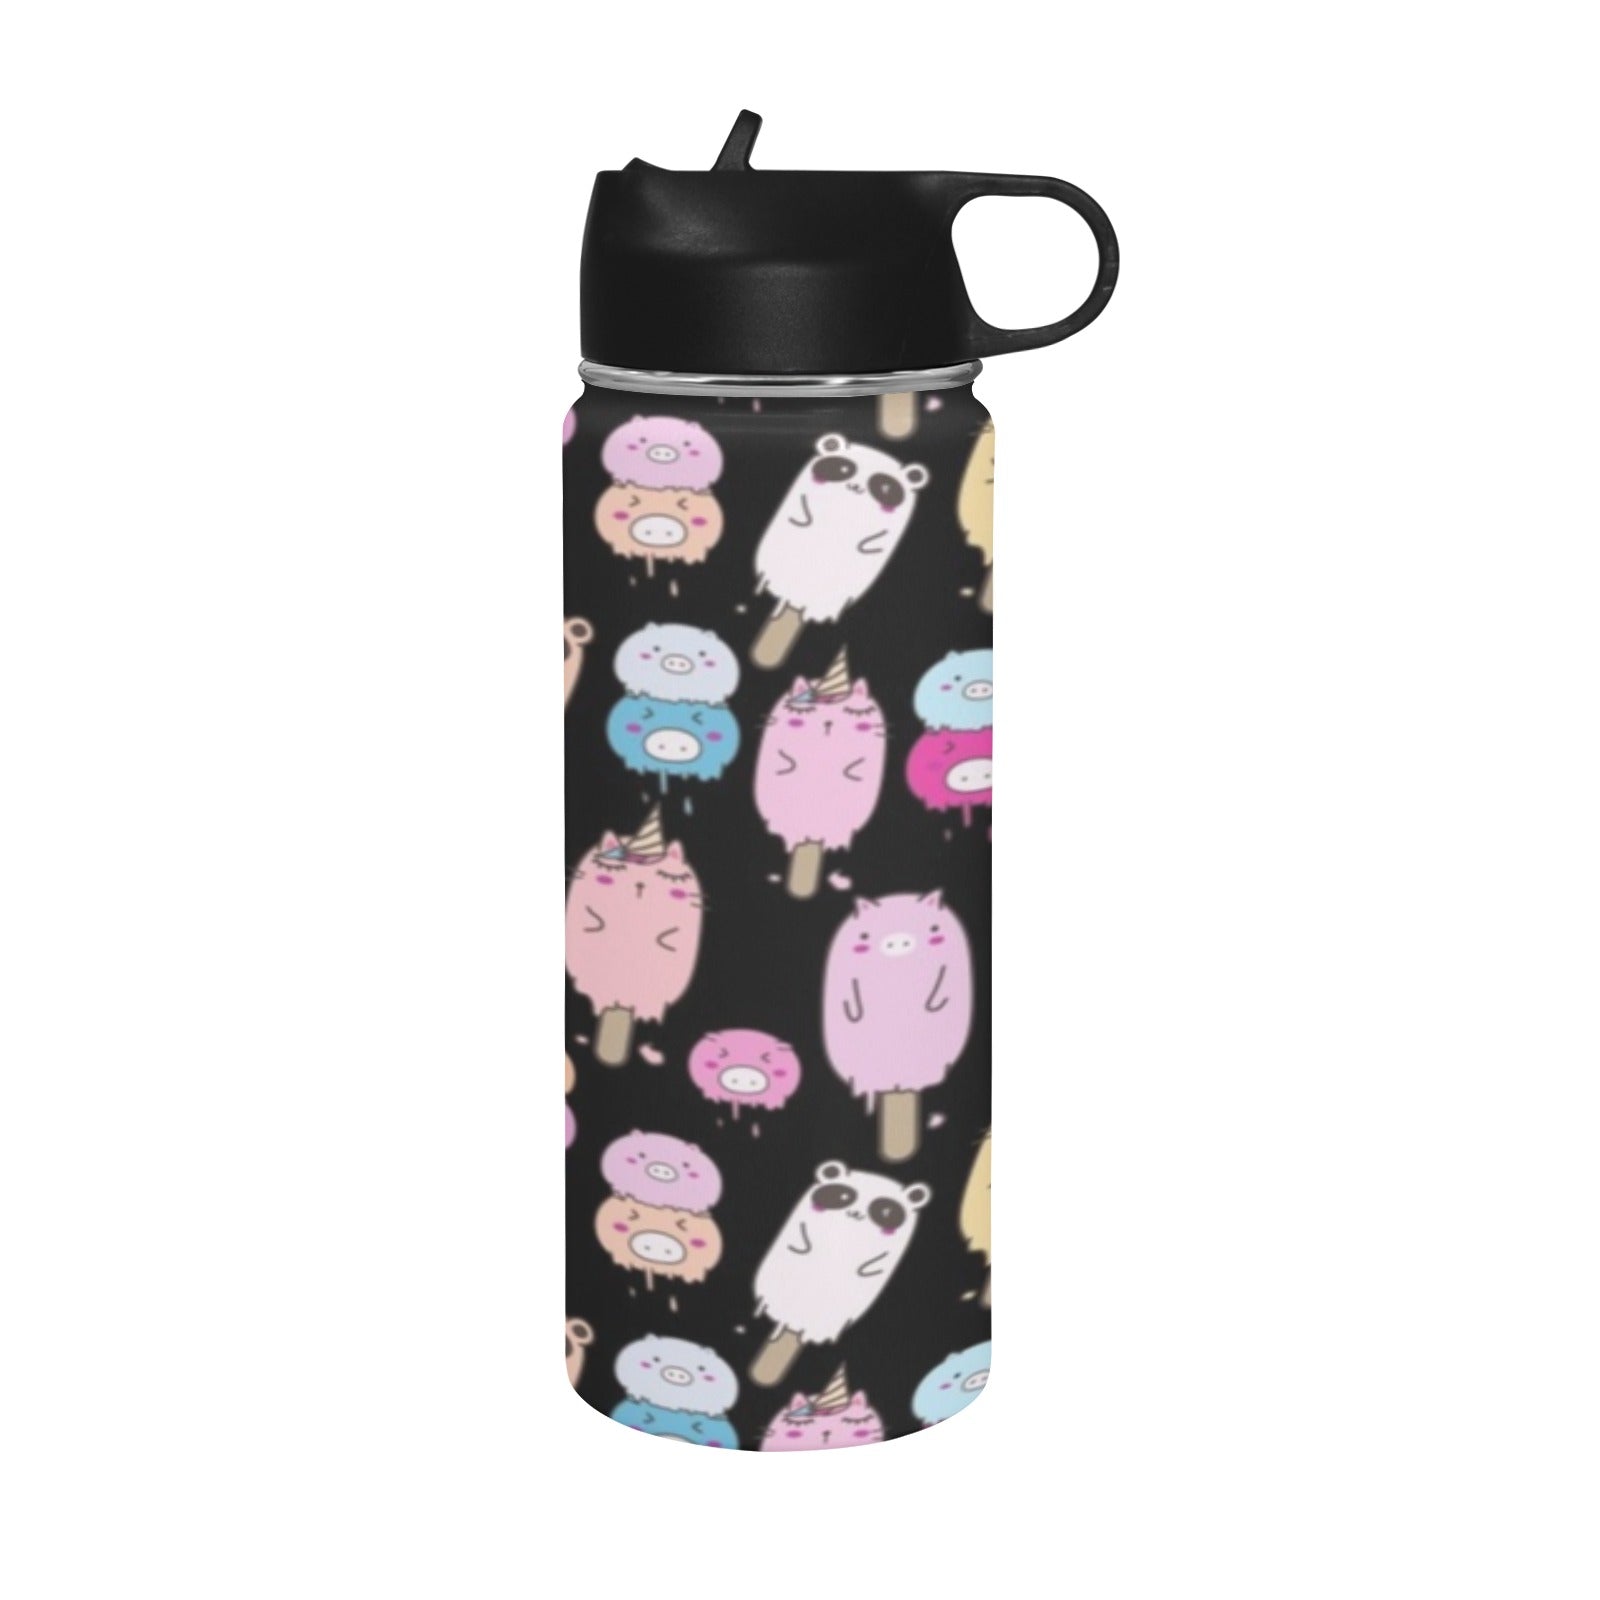 Cute Animal Ice Blocks - Insulated Water Bottle with Straw Lid (18 oz) Insulated Water Bottle with Straw Lid